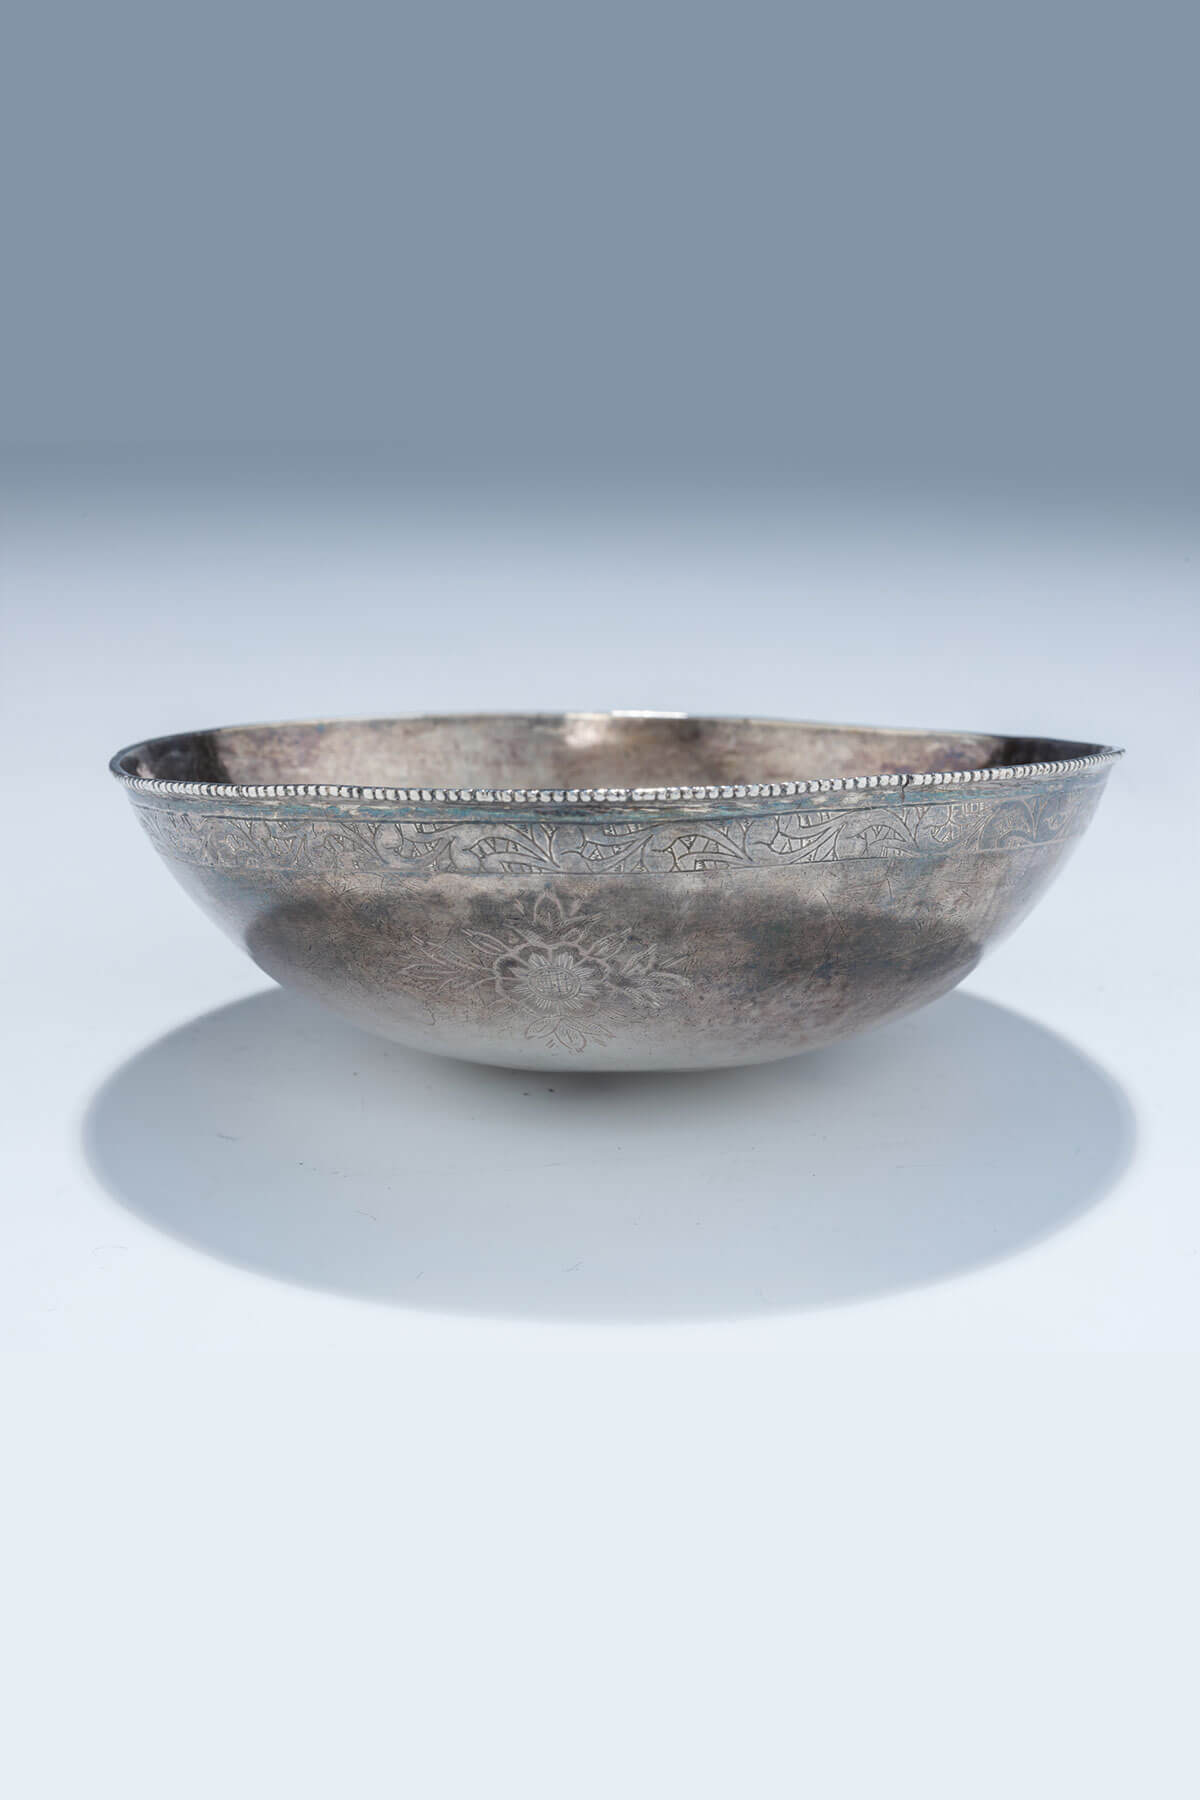 66. A Large Silver Kiddush Cup